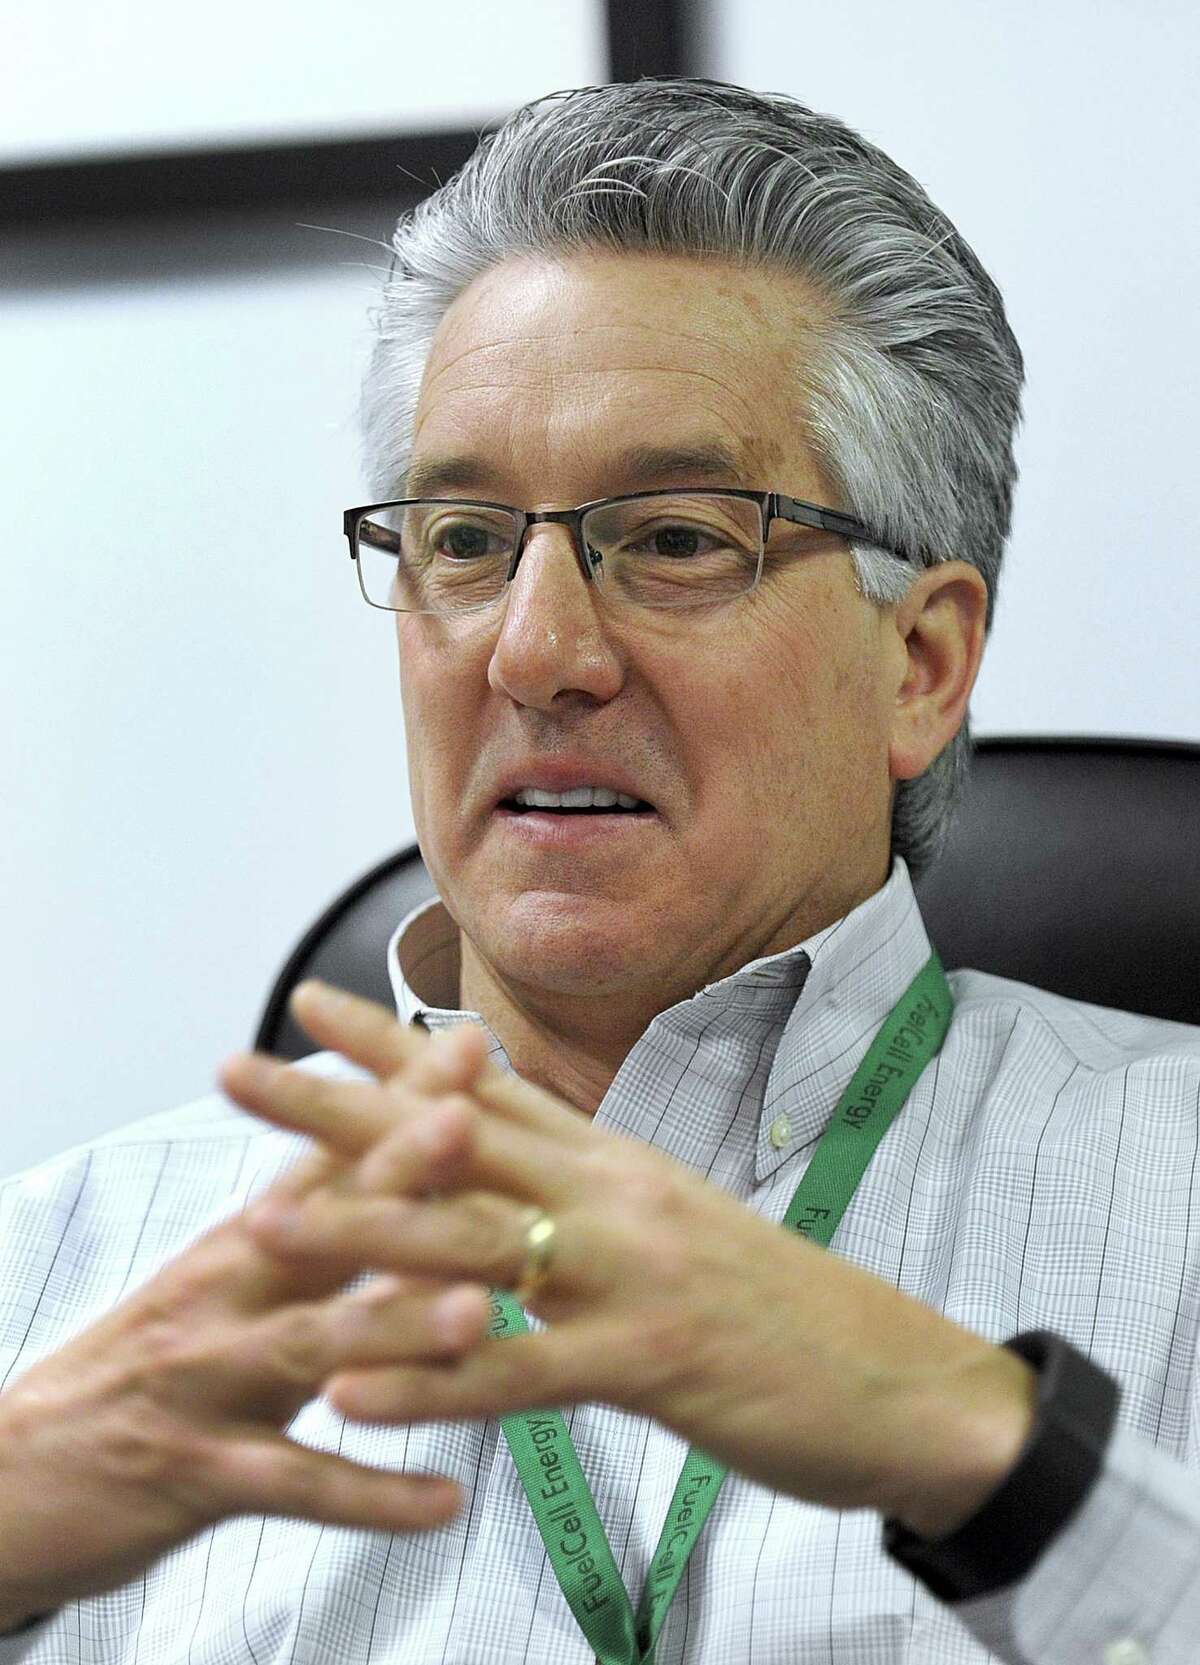 Former FuelCell Energy CEO Chip Bottone in February 2017.